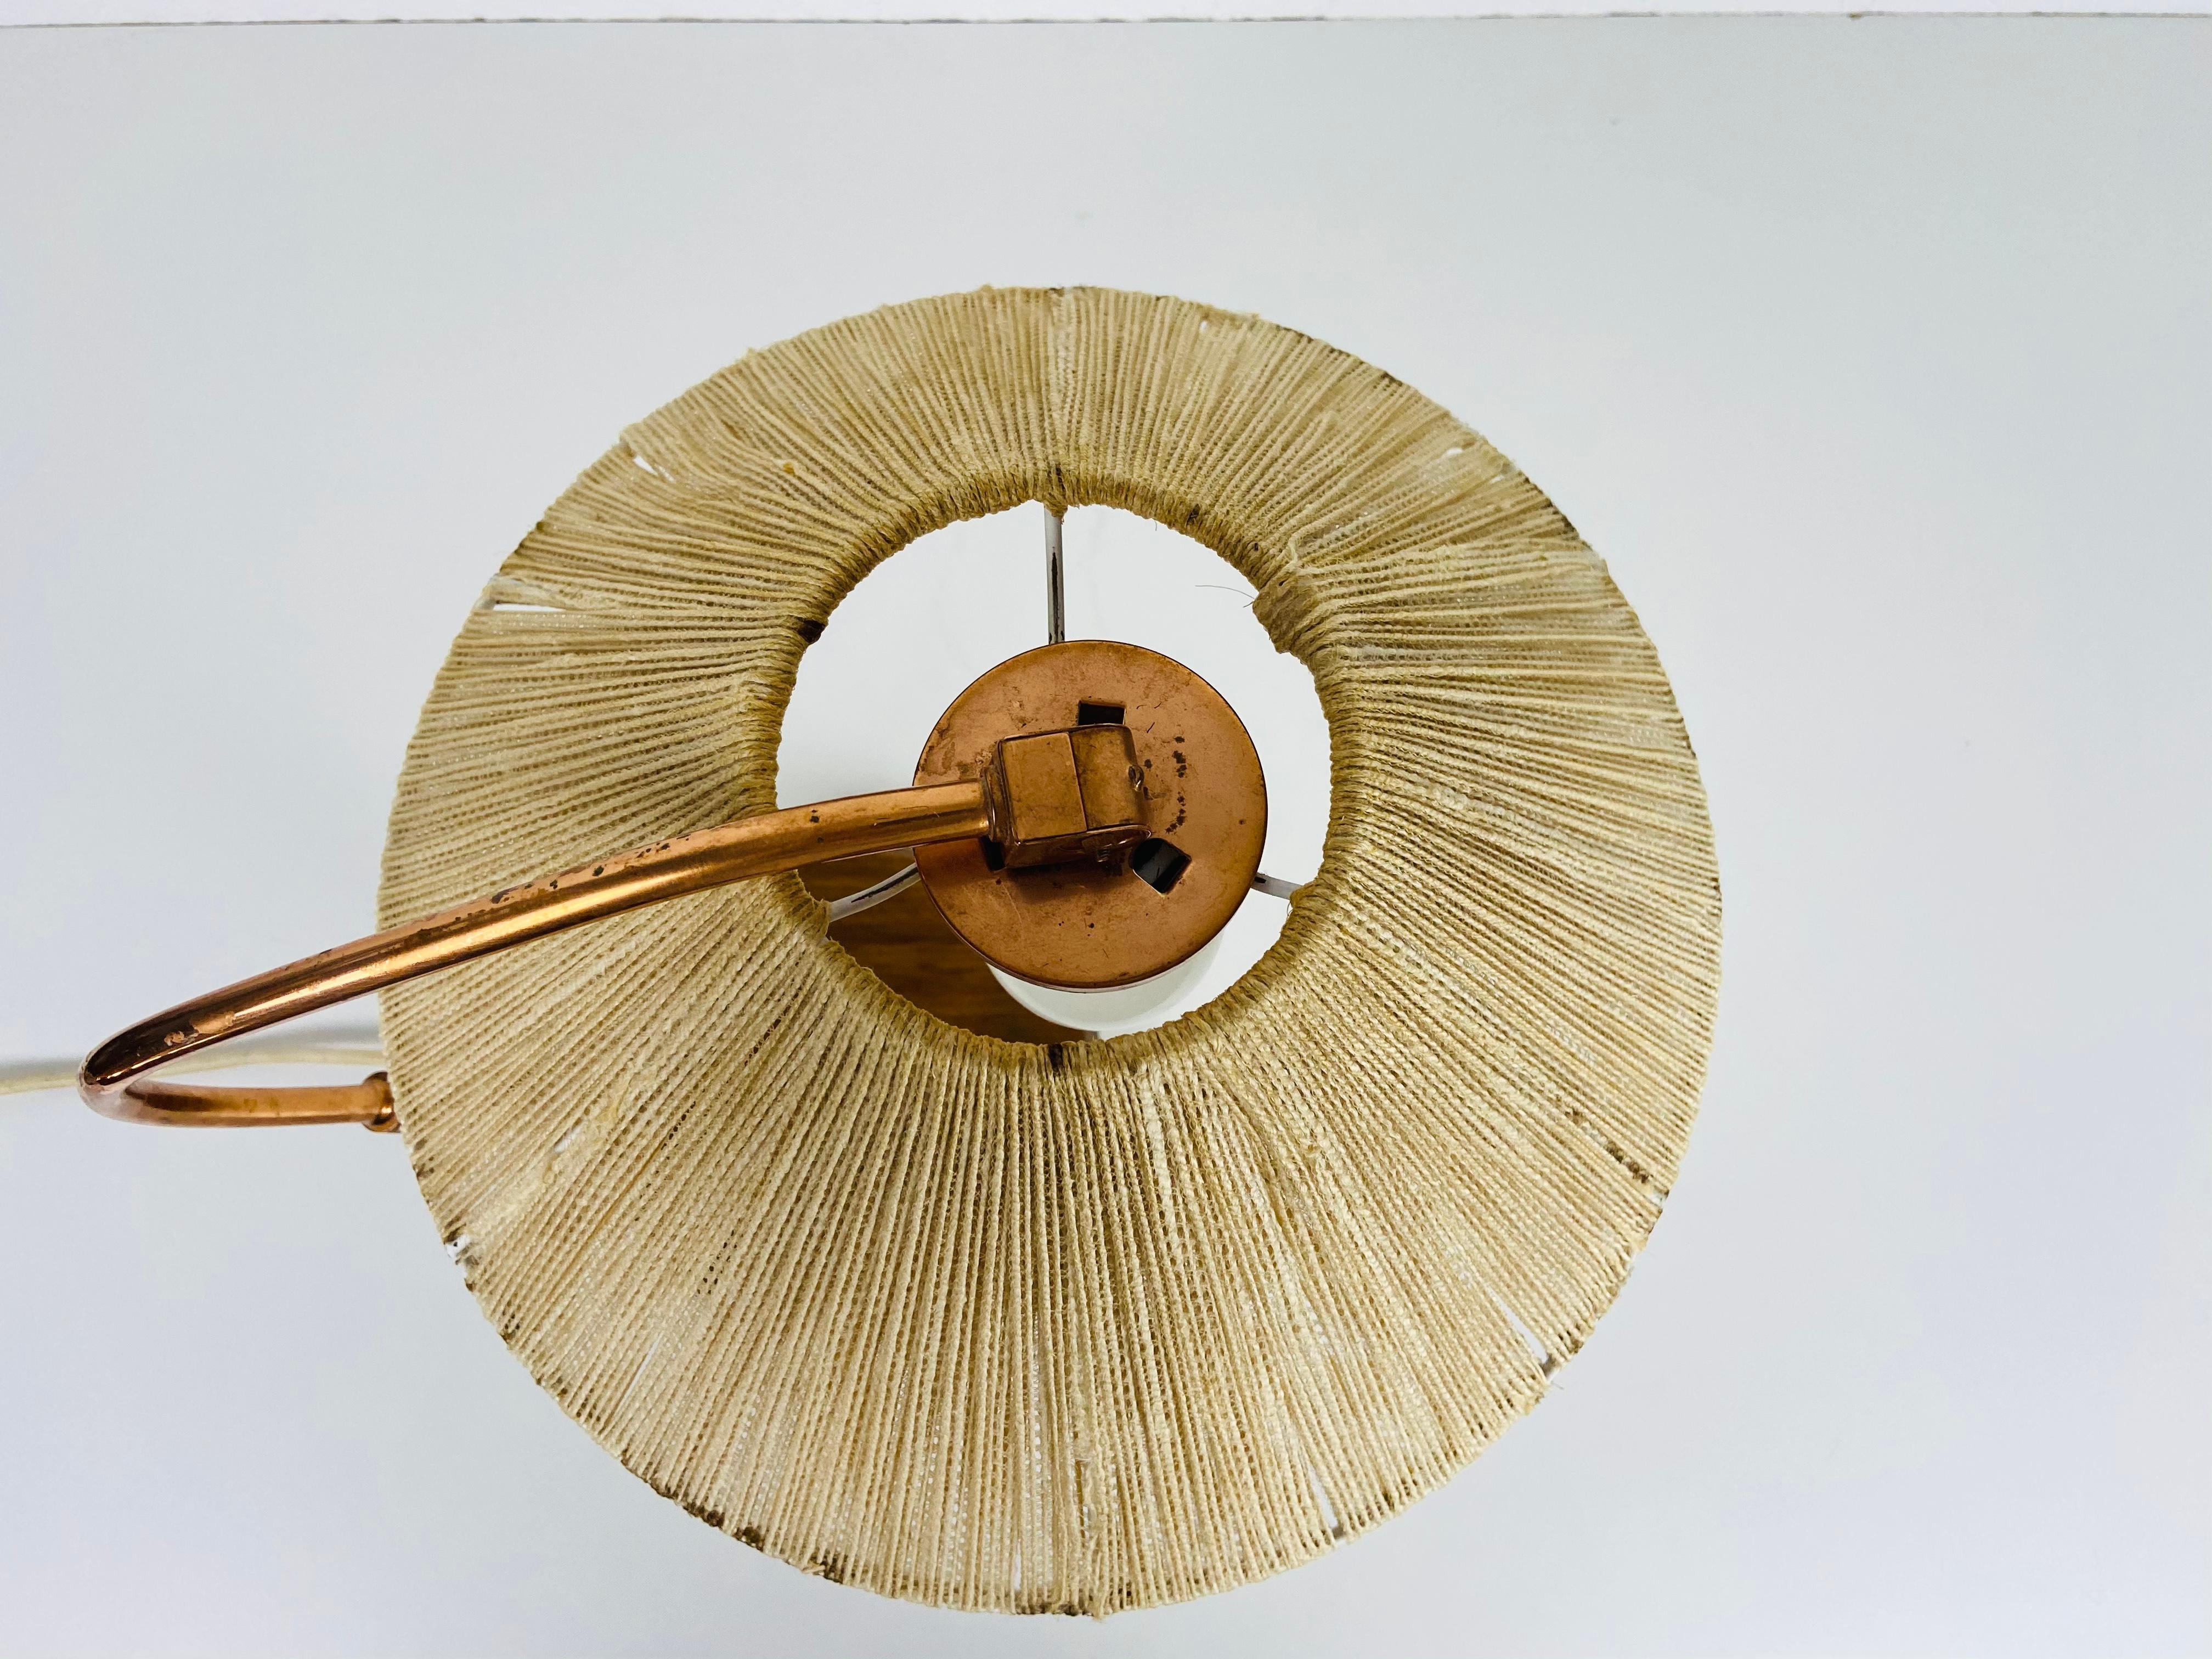 Midcentury Teak and Rattan Table Lamp by Temde, circa 1970 For Sale 1